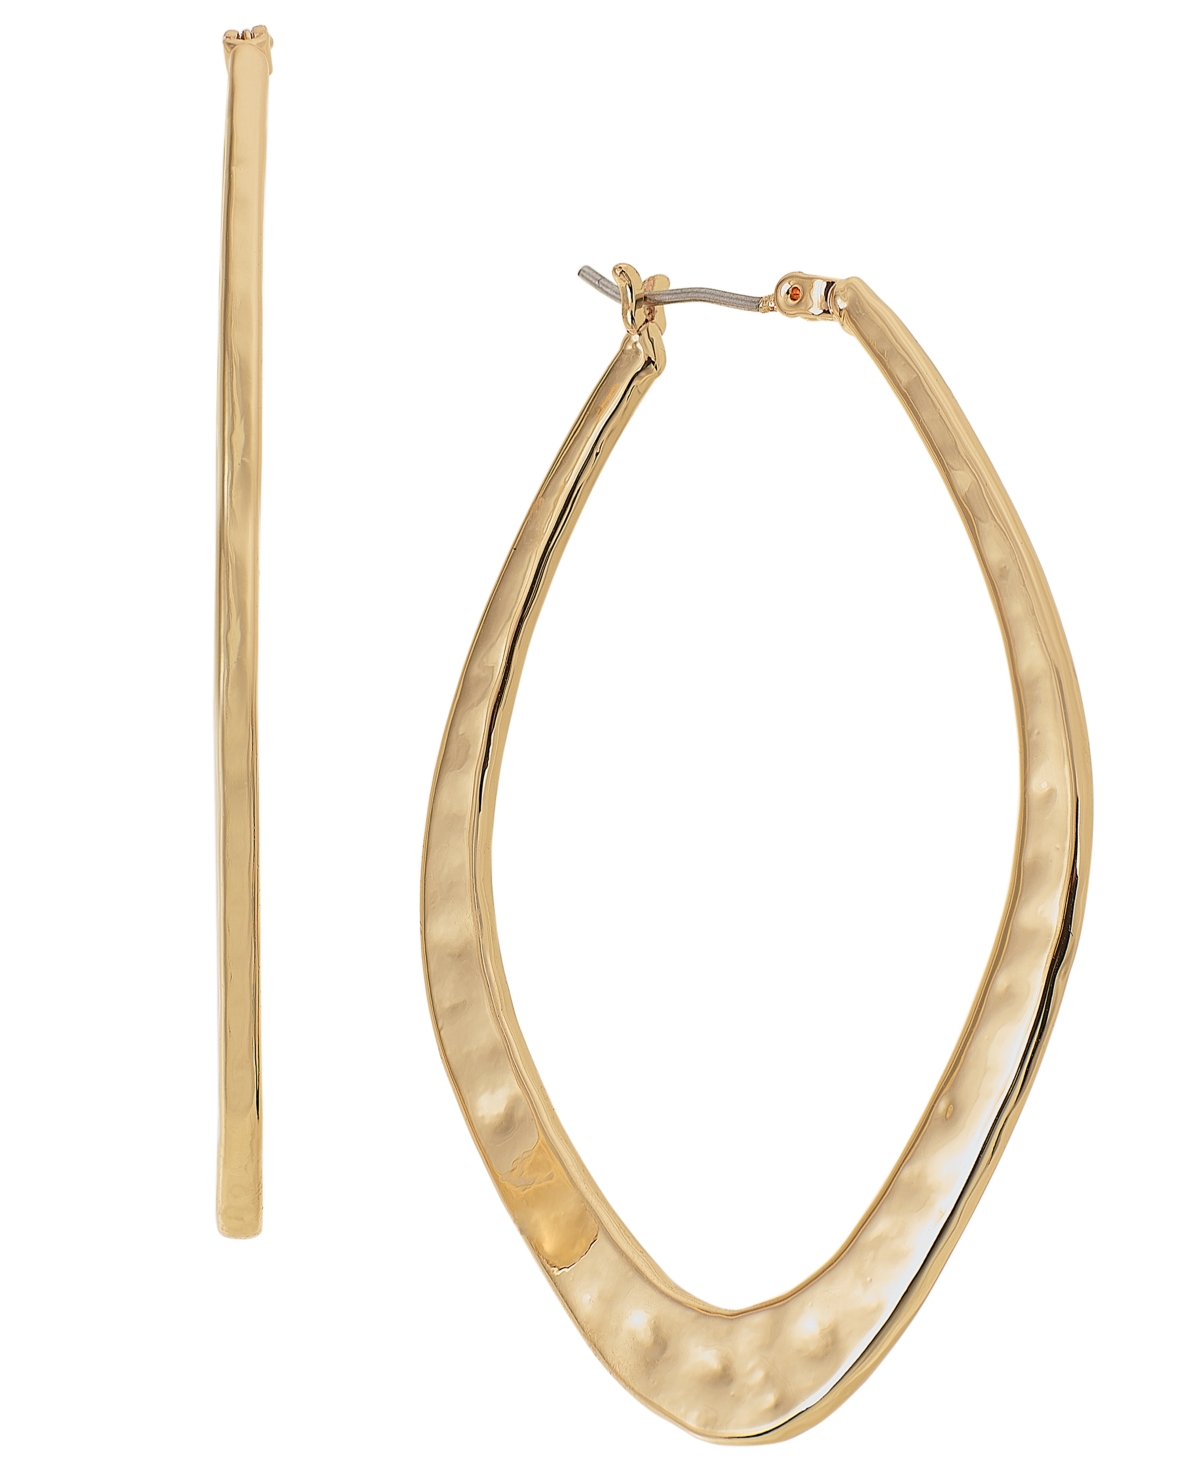 Hammered Diamond Large Hoop Earrings, 2.2", Created for Macy's - Gold